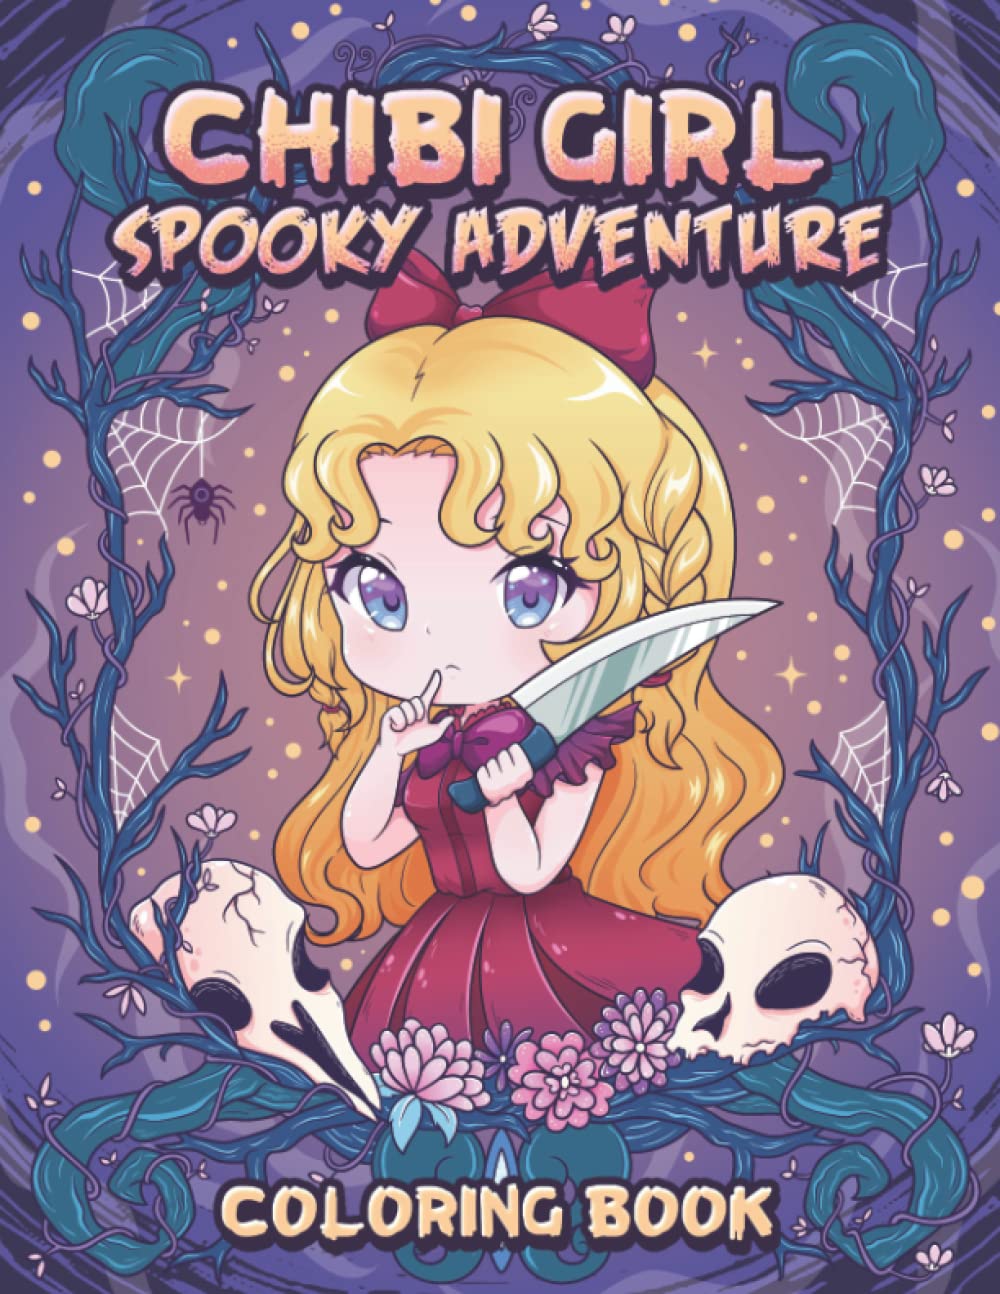 Chibi Girl Spooky Adventure Coloring Book: A Creepy Kawaii Coloring Book of Cute Chibi Girl with Horror Characters (Paperback)